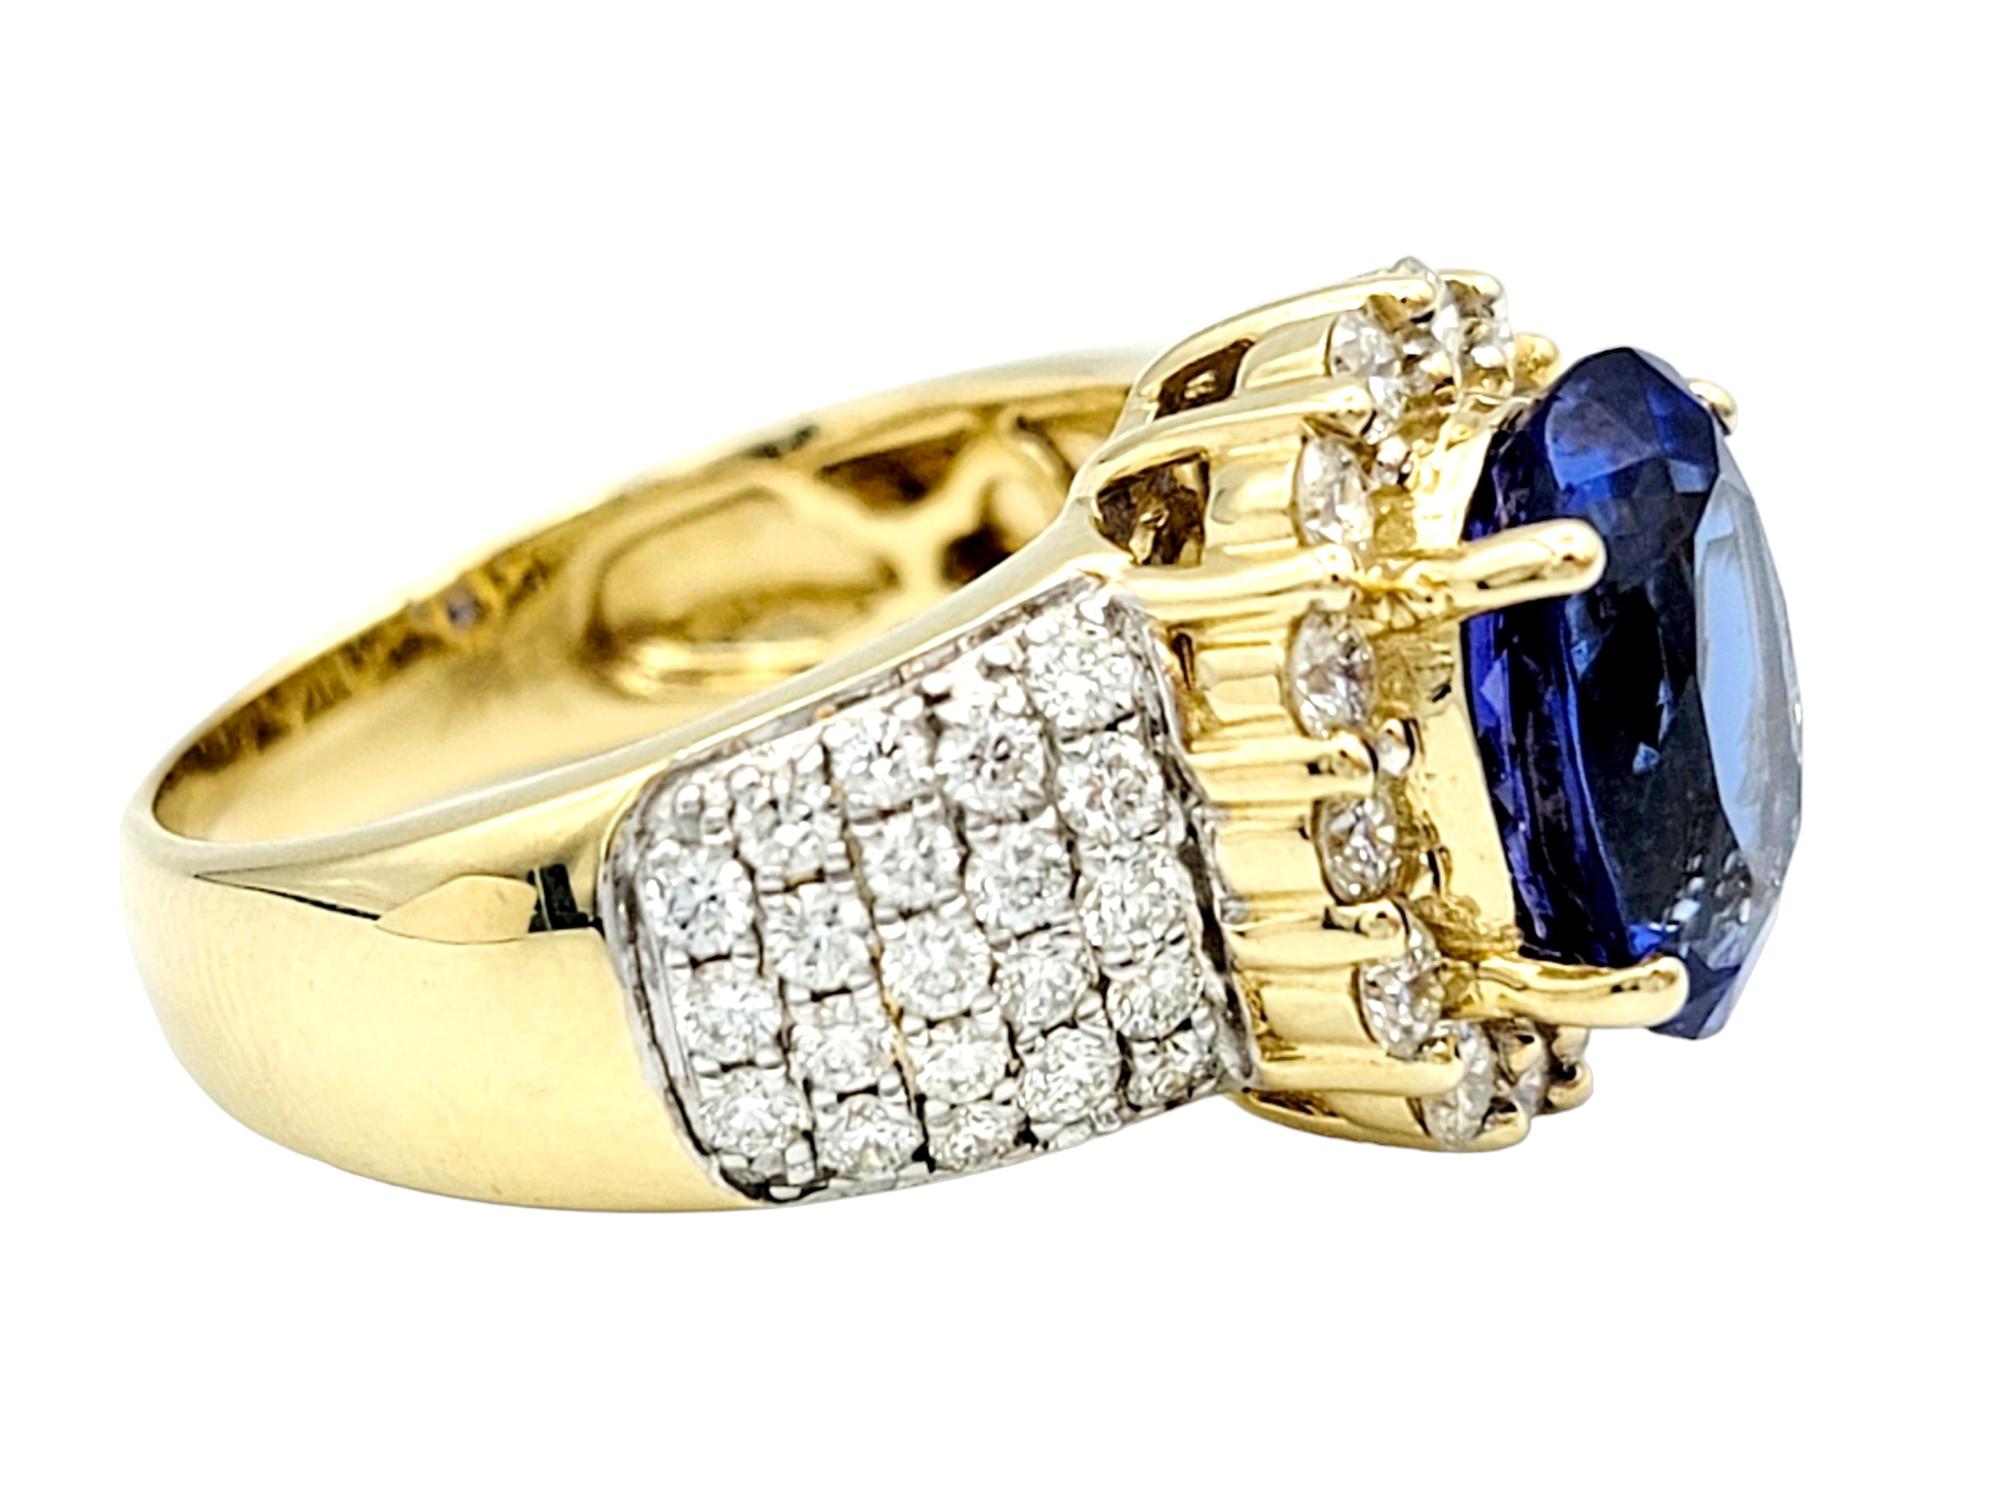 4.98 Carat Total Oval Tanzanite and Diamond Halo Cocktail Ring in 14 Karat Gold In Good Condition For Sale In Scottsdale, AZ